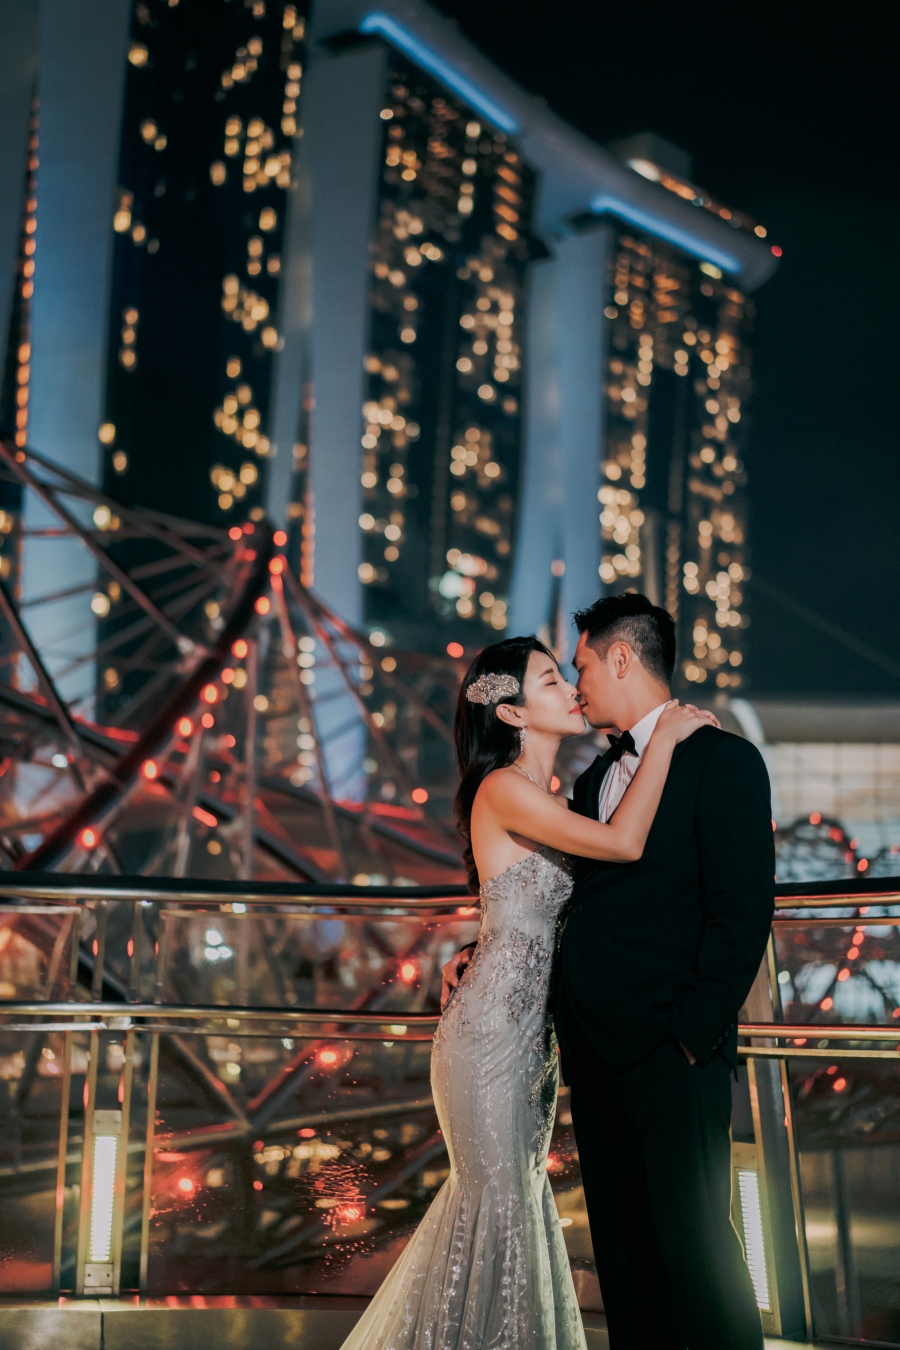 Singapore Pre-Wedding Photoshoot At Cloud Forest, Fort Canning Spiral Staircase And Marina Bay For Korean Couple  by Michael  on OneThreeOneFour 12